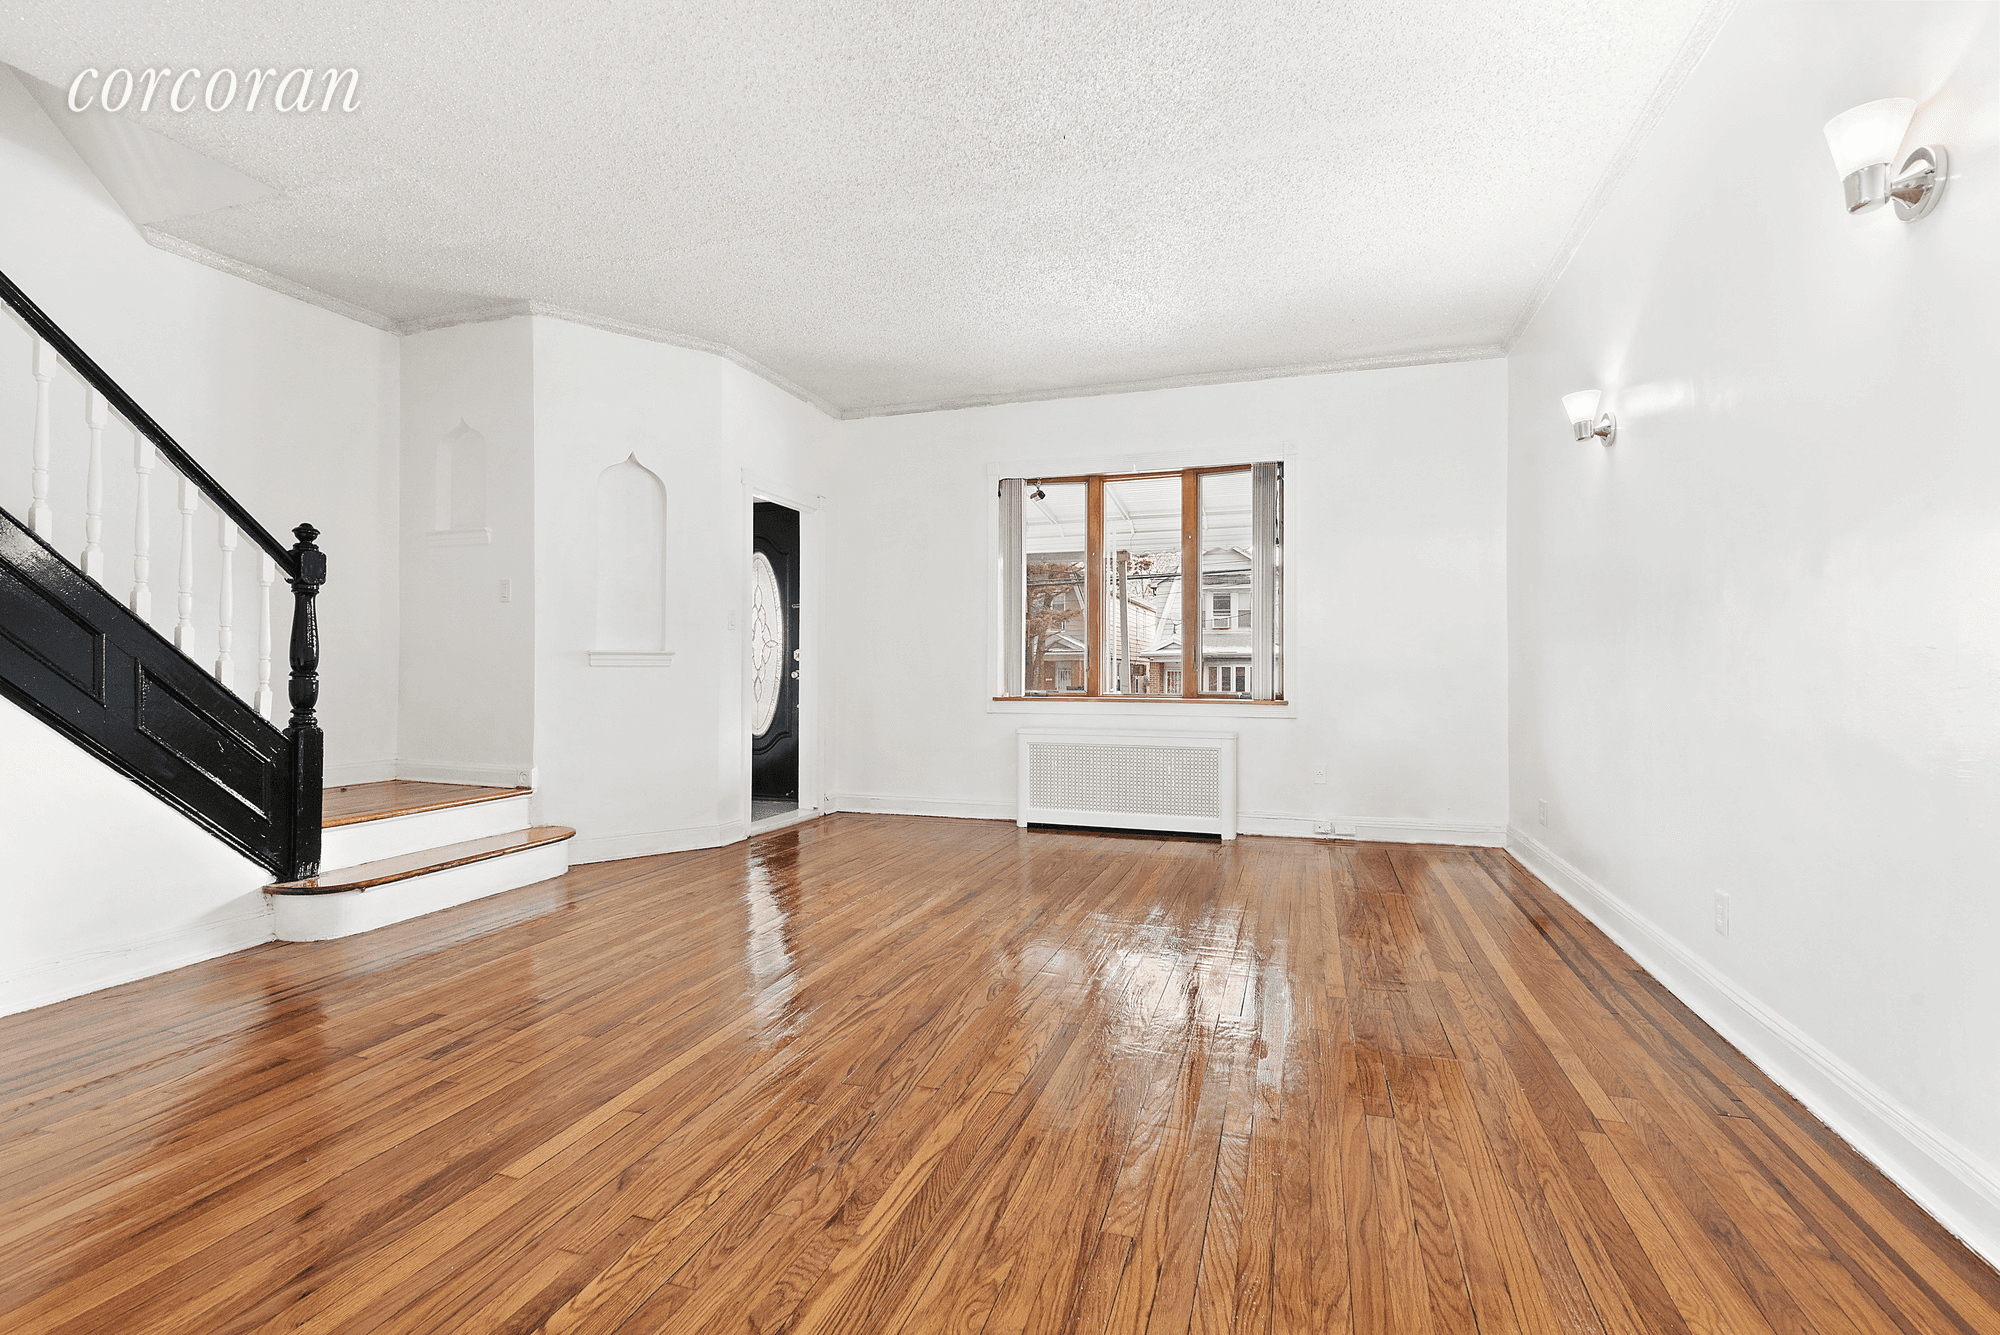 A lovely READY TO MOVE IN, renovated Brick townhouse in the East Flatbush area of Brooklyn, on a quiet tree lined block.